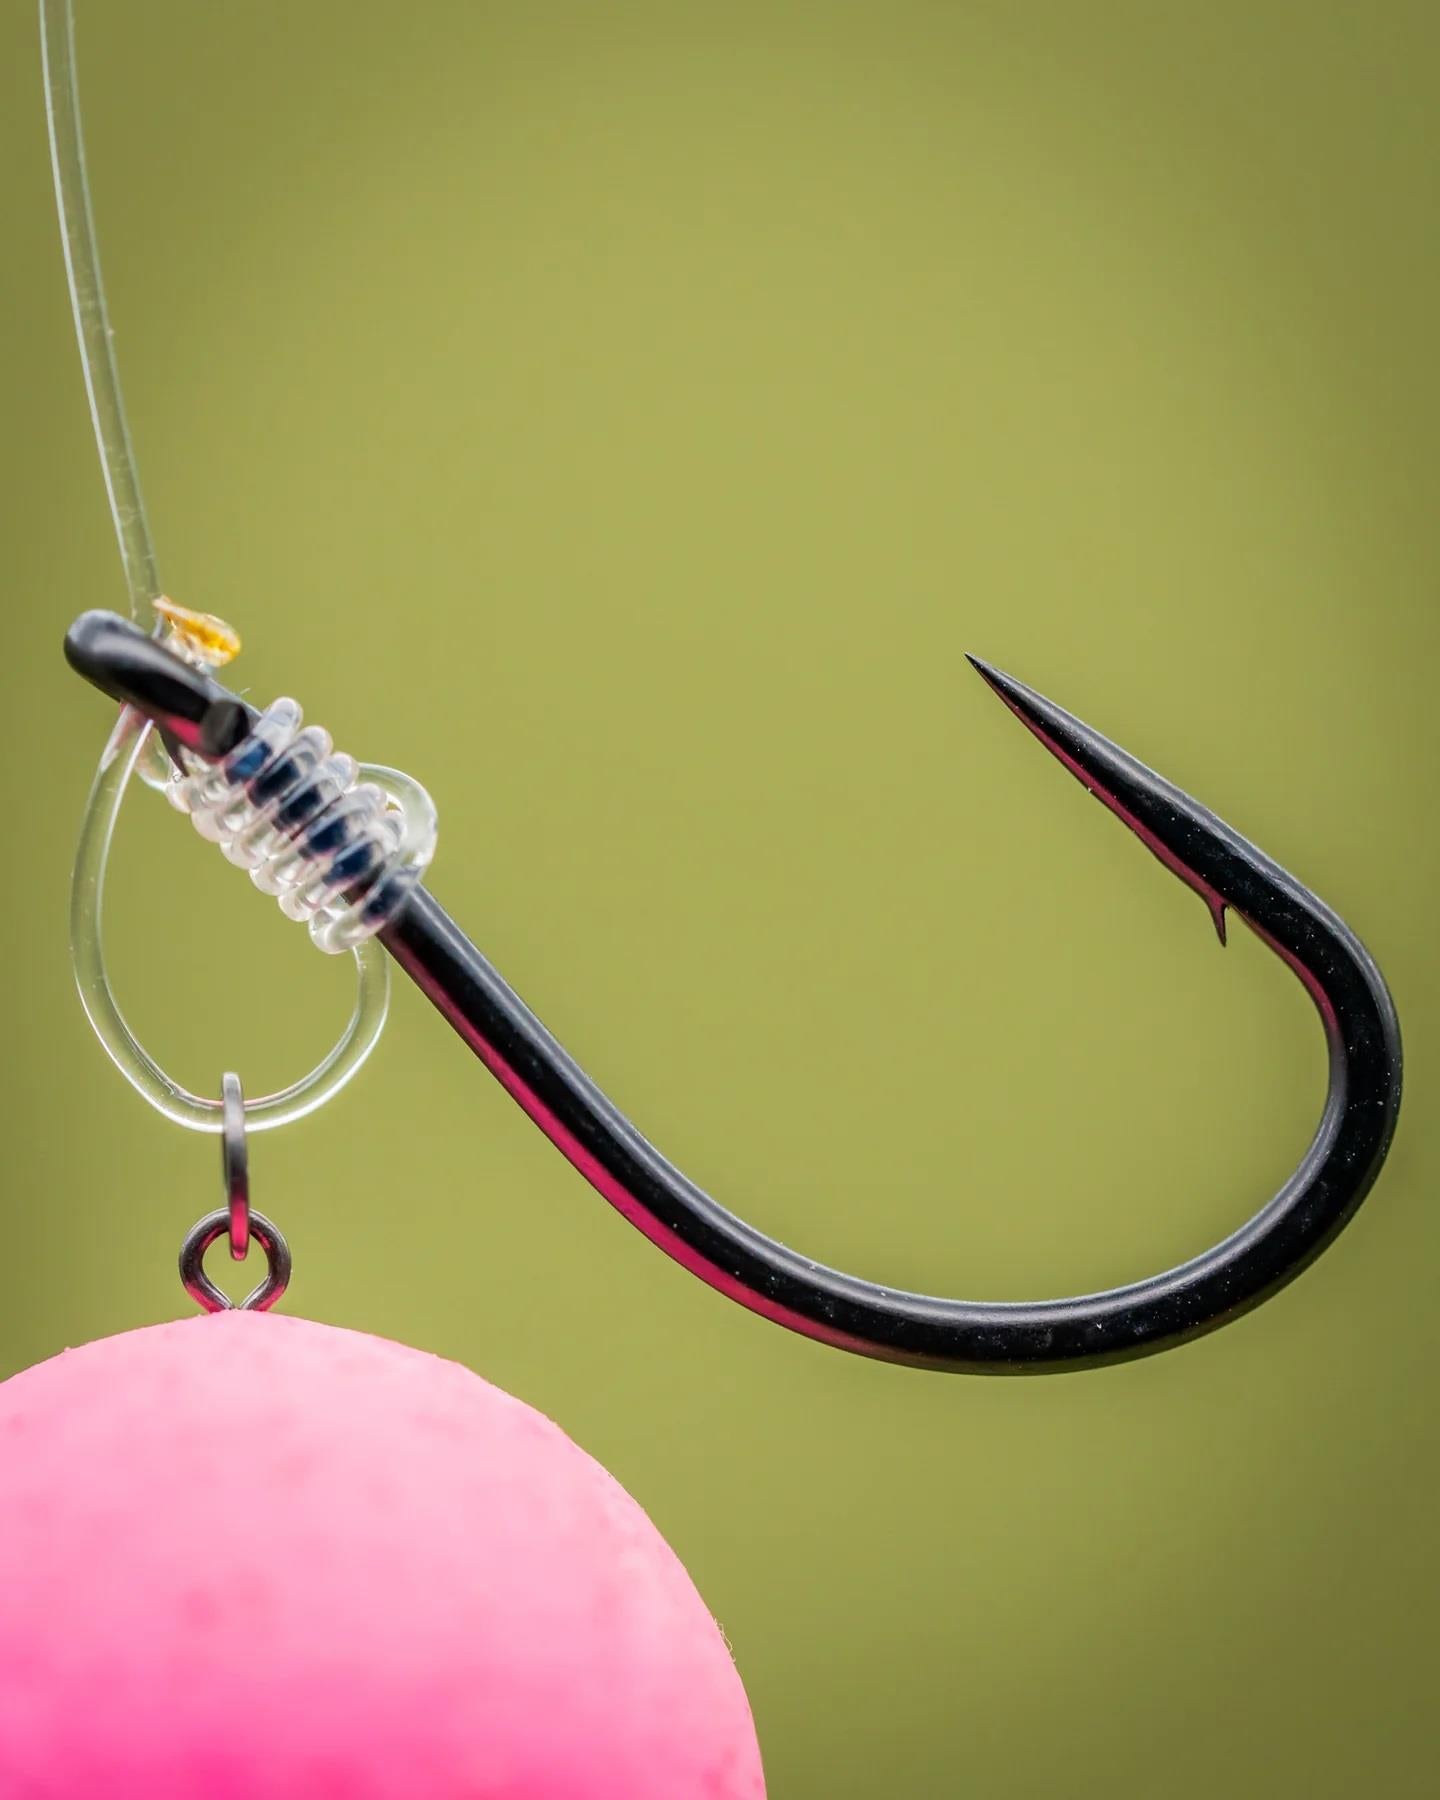 One More Cast OMC Redesmere Surrender Chod Hooks – Great Fishing